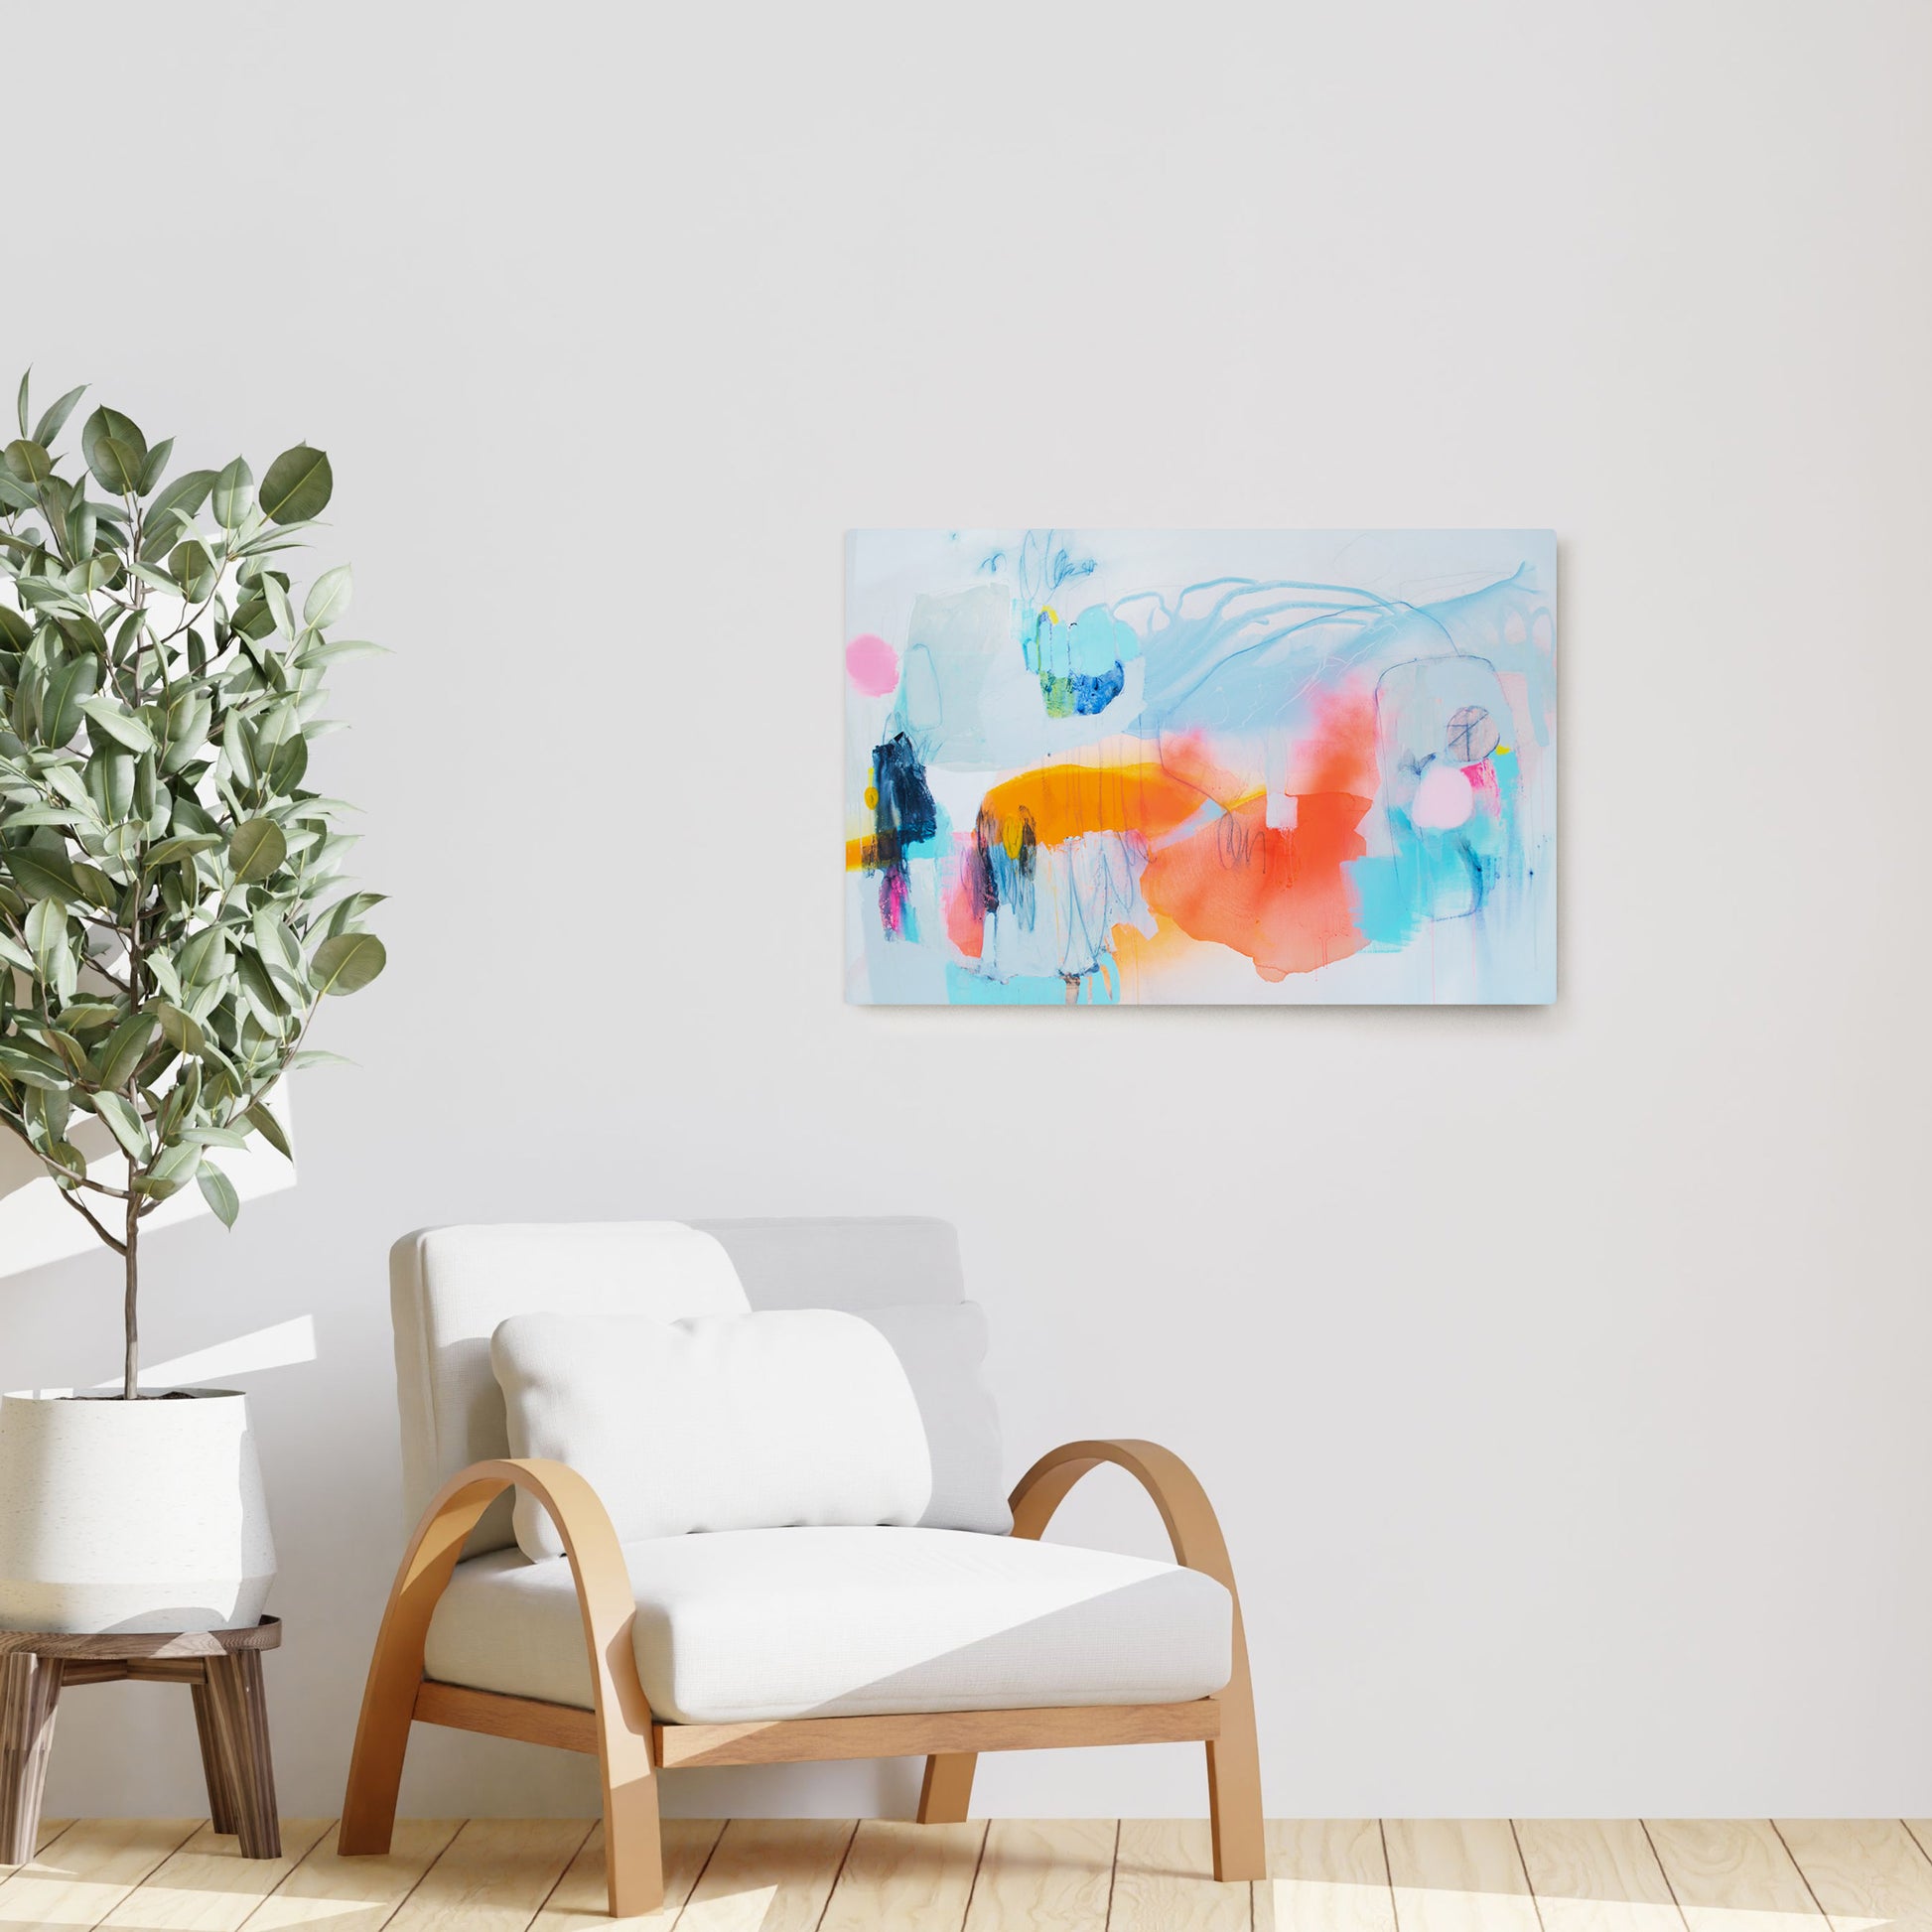 Claire Desjardins' Hold Out painting reproduced on HD metal print and displayed on wall